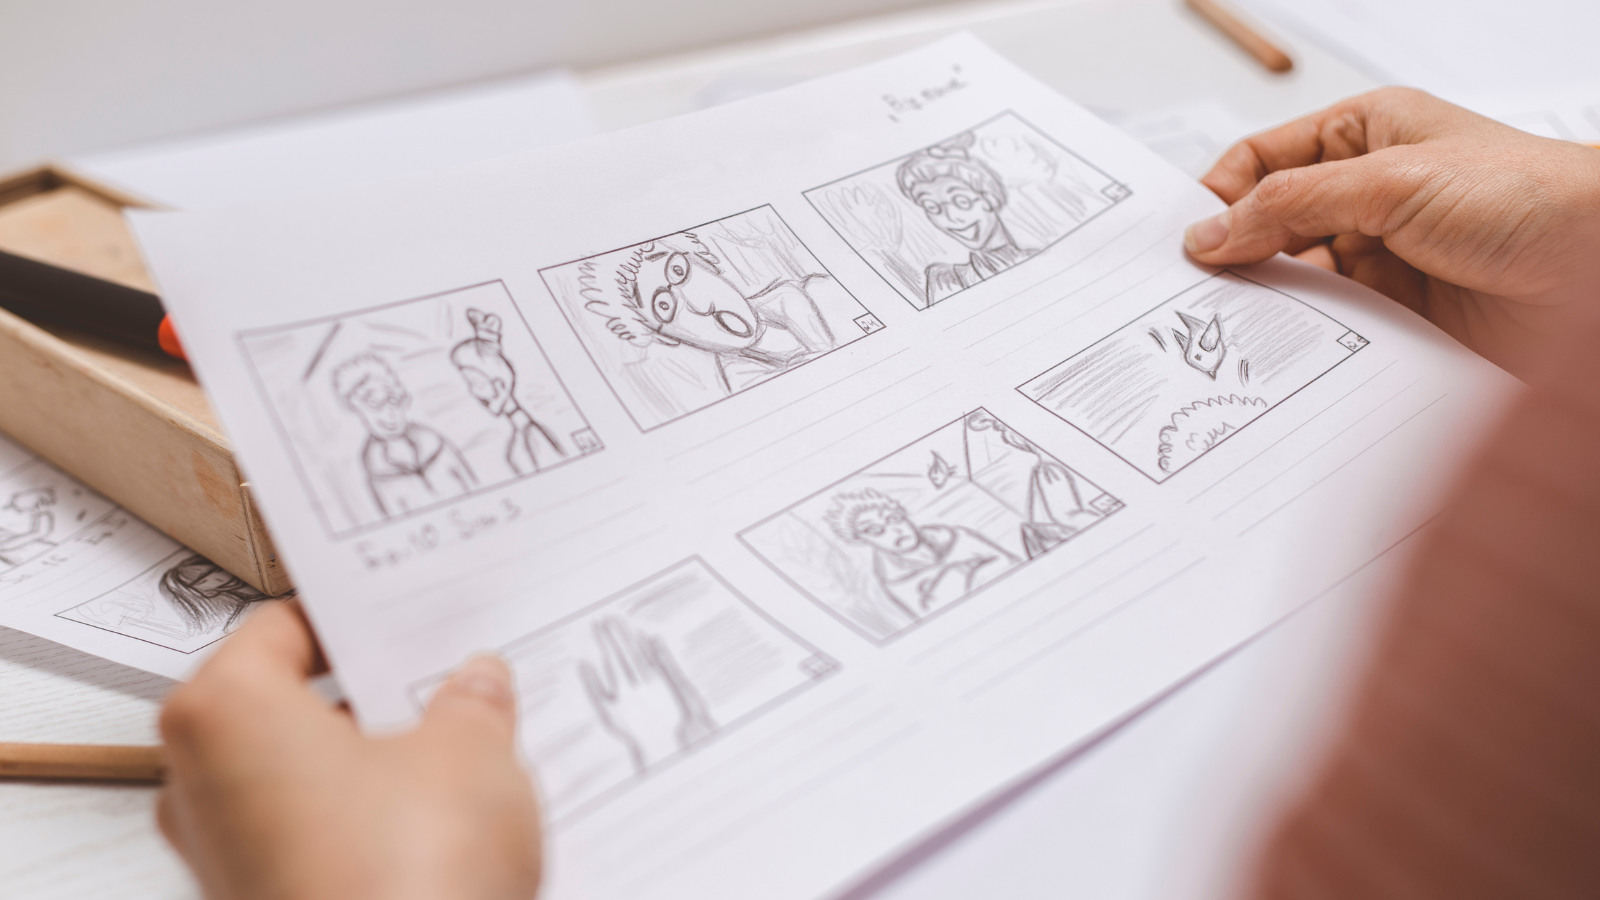 A person looking at a penciled storyboard